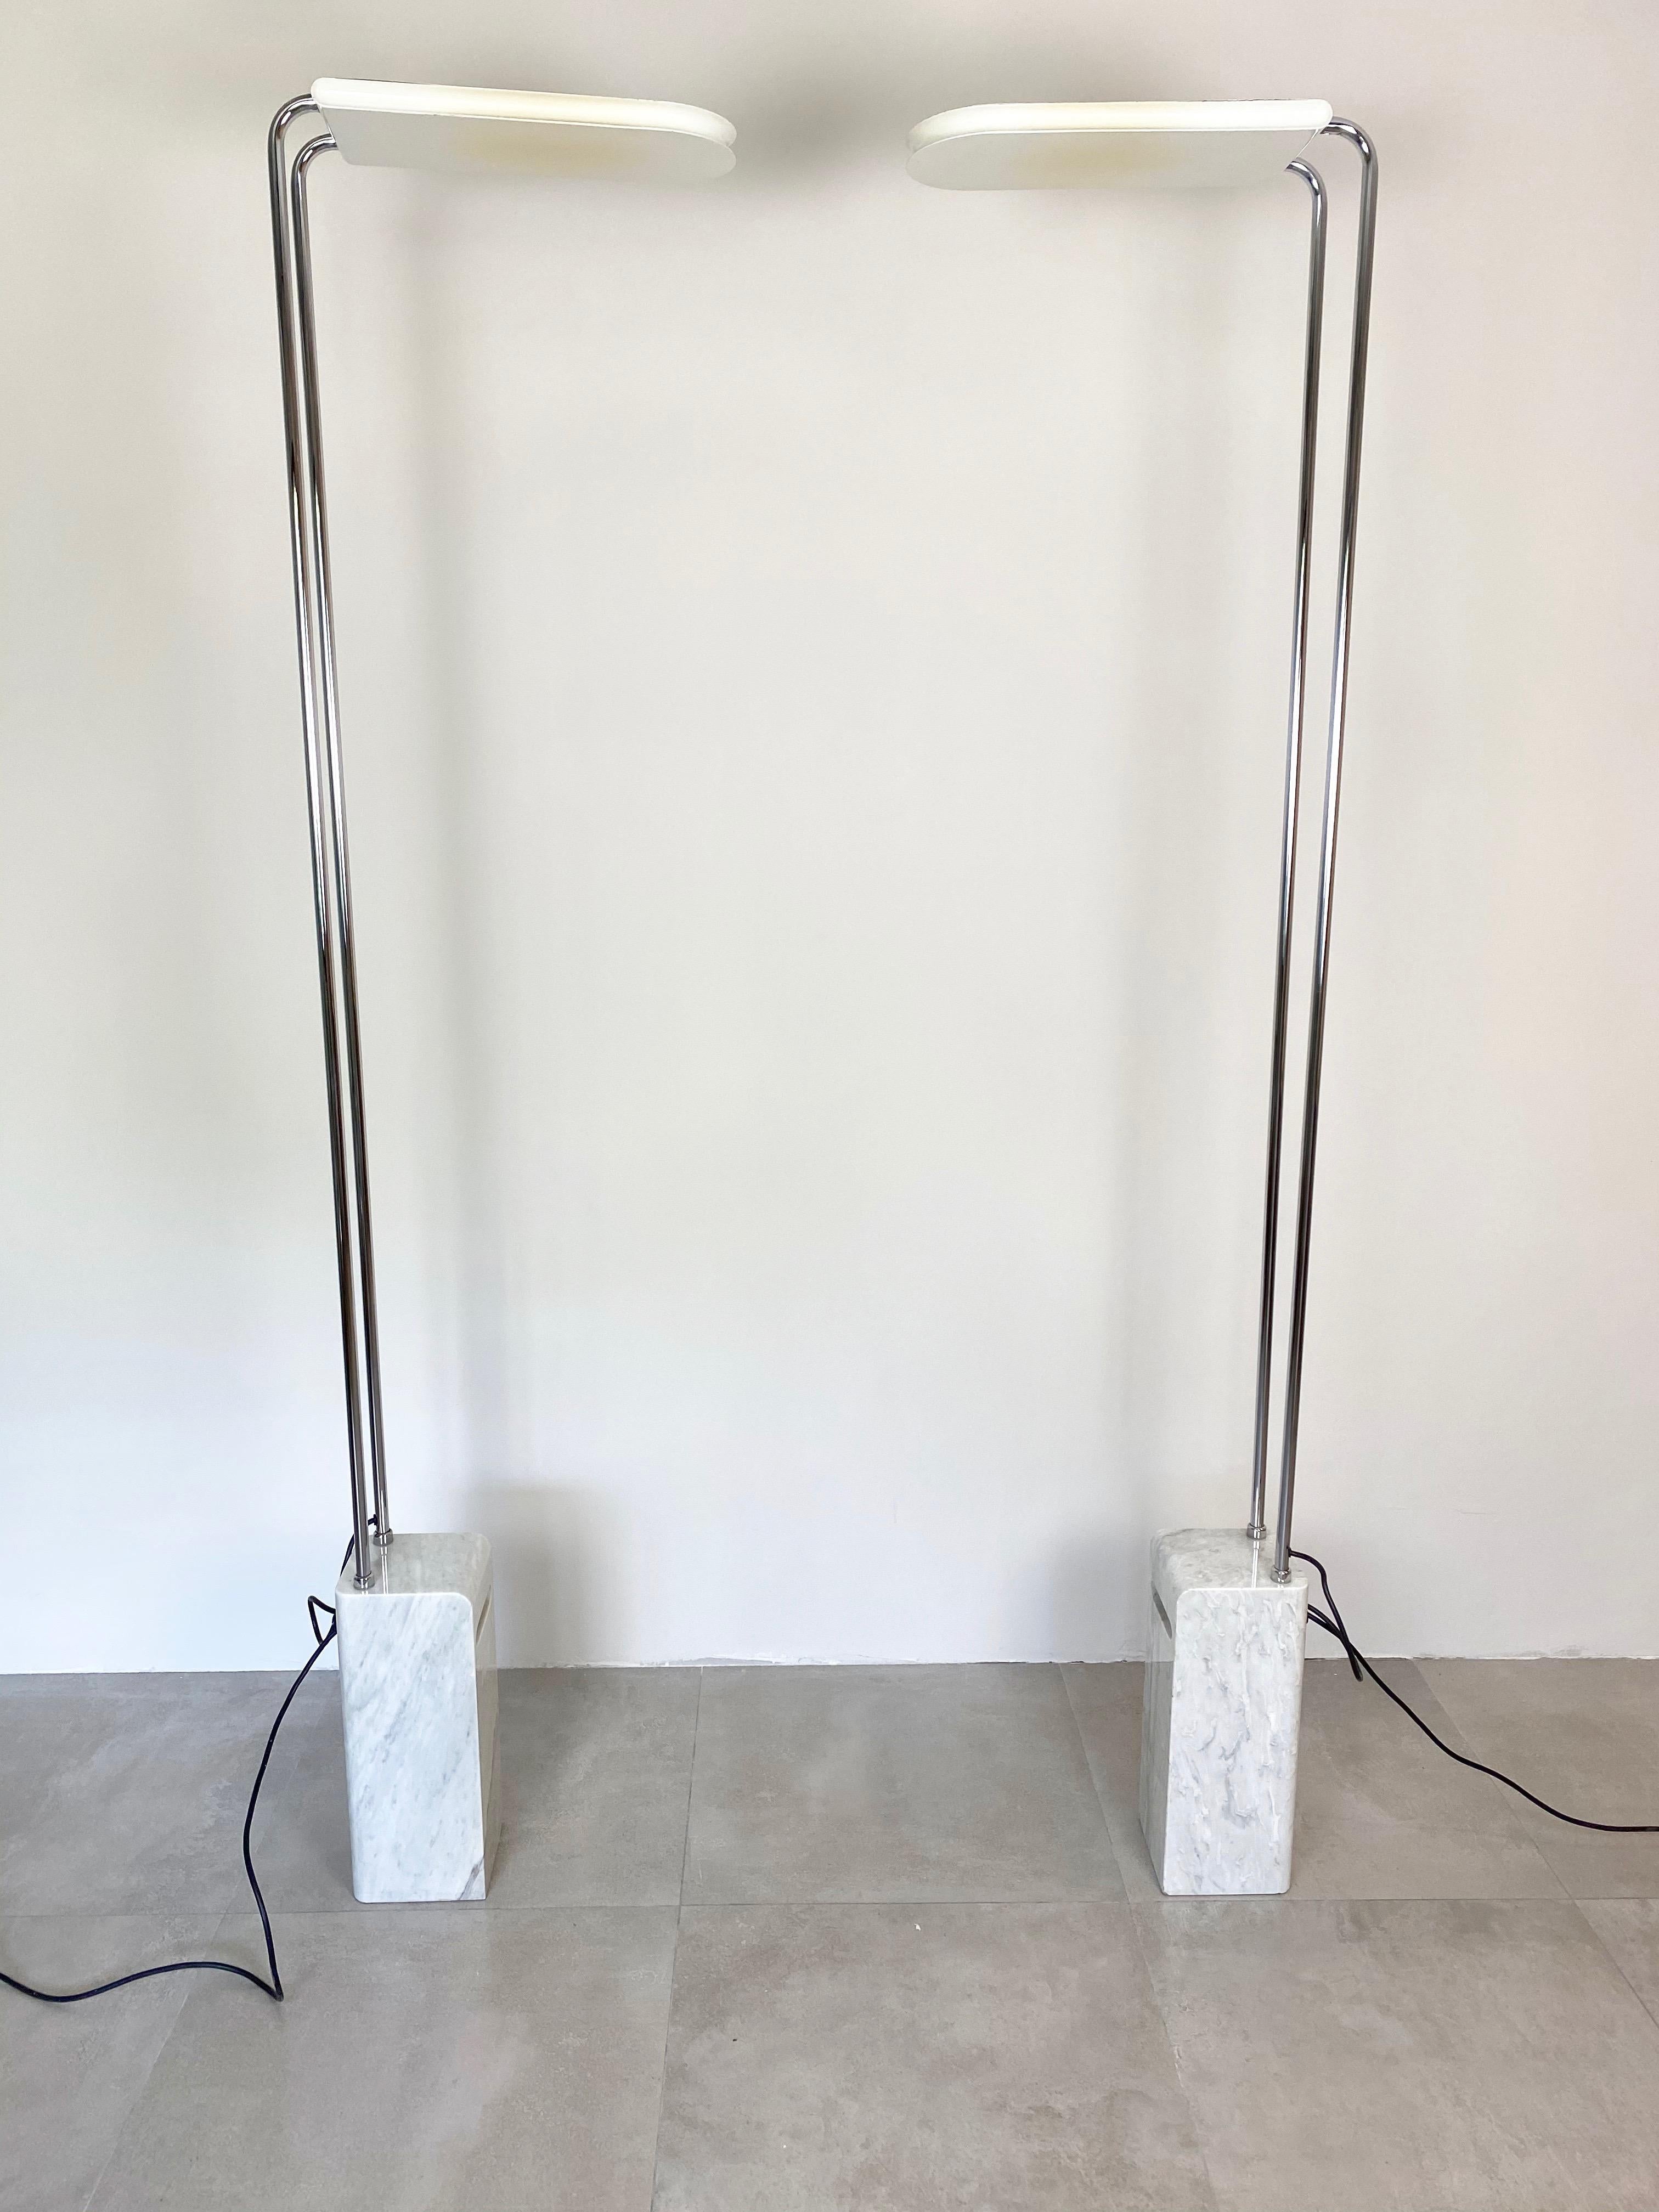 Pair of Gesto Floor Lamp Marble Chrome by Bruno Gecchelin Skipper, Italy, 1970s For Sale 2